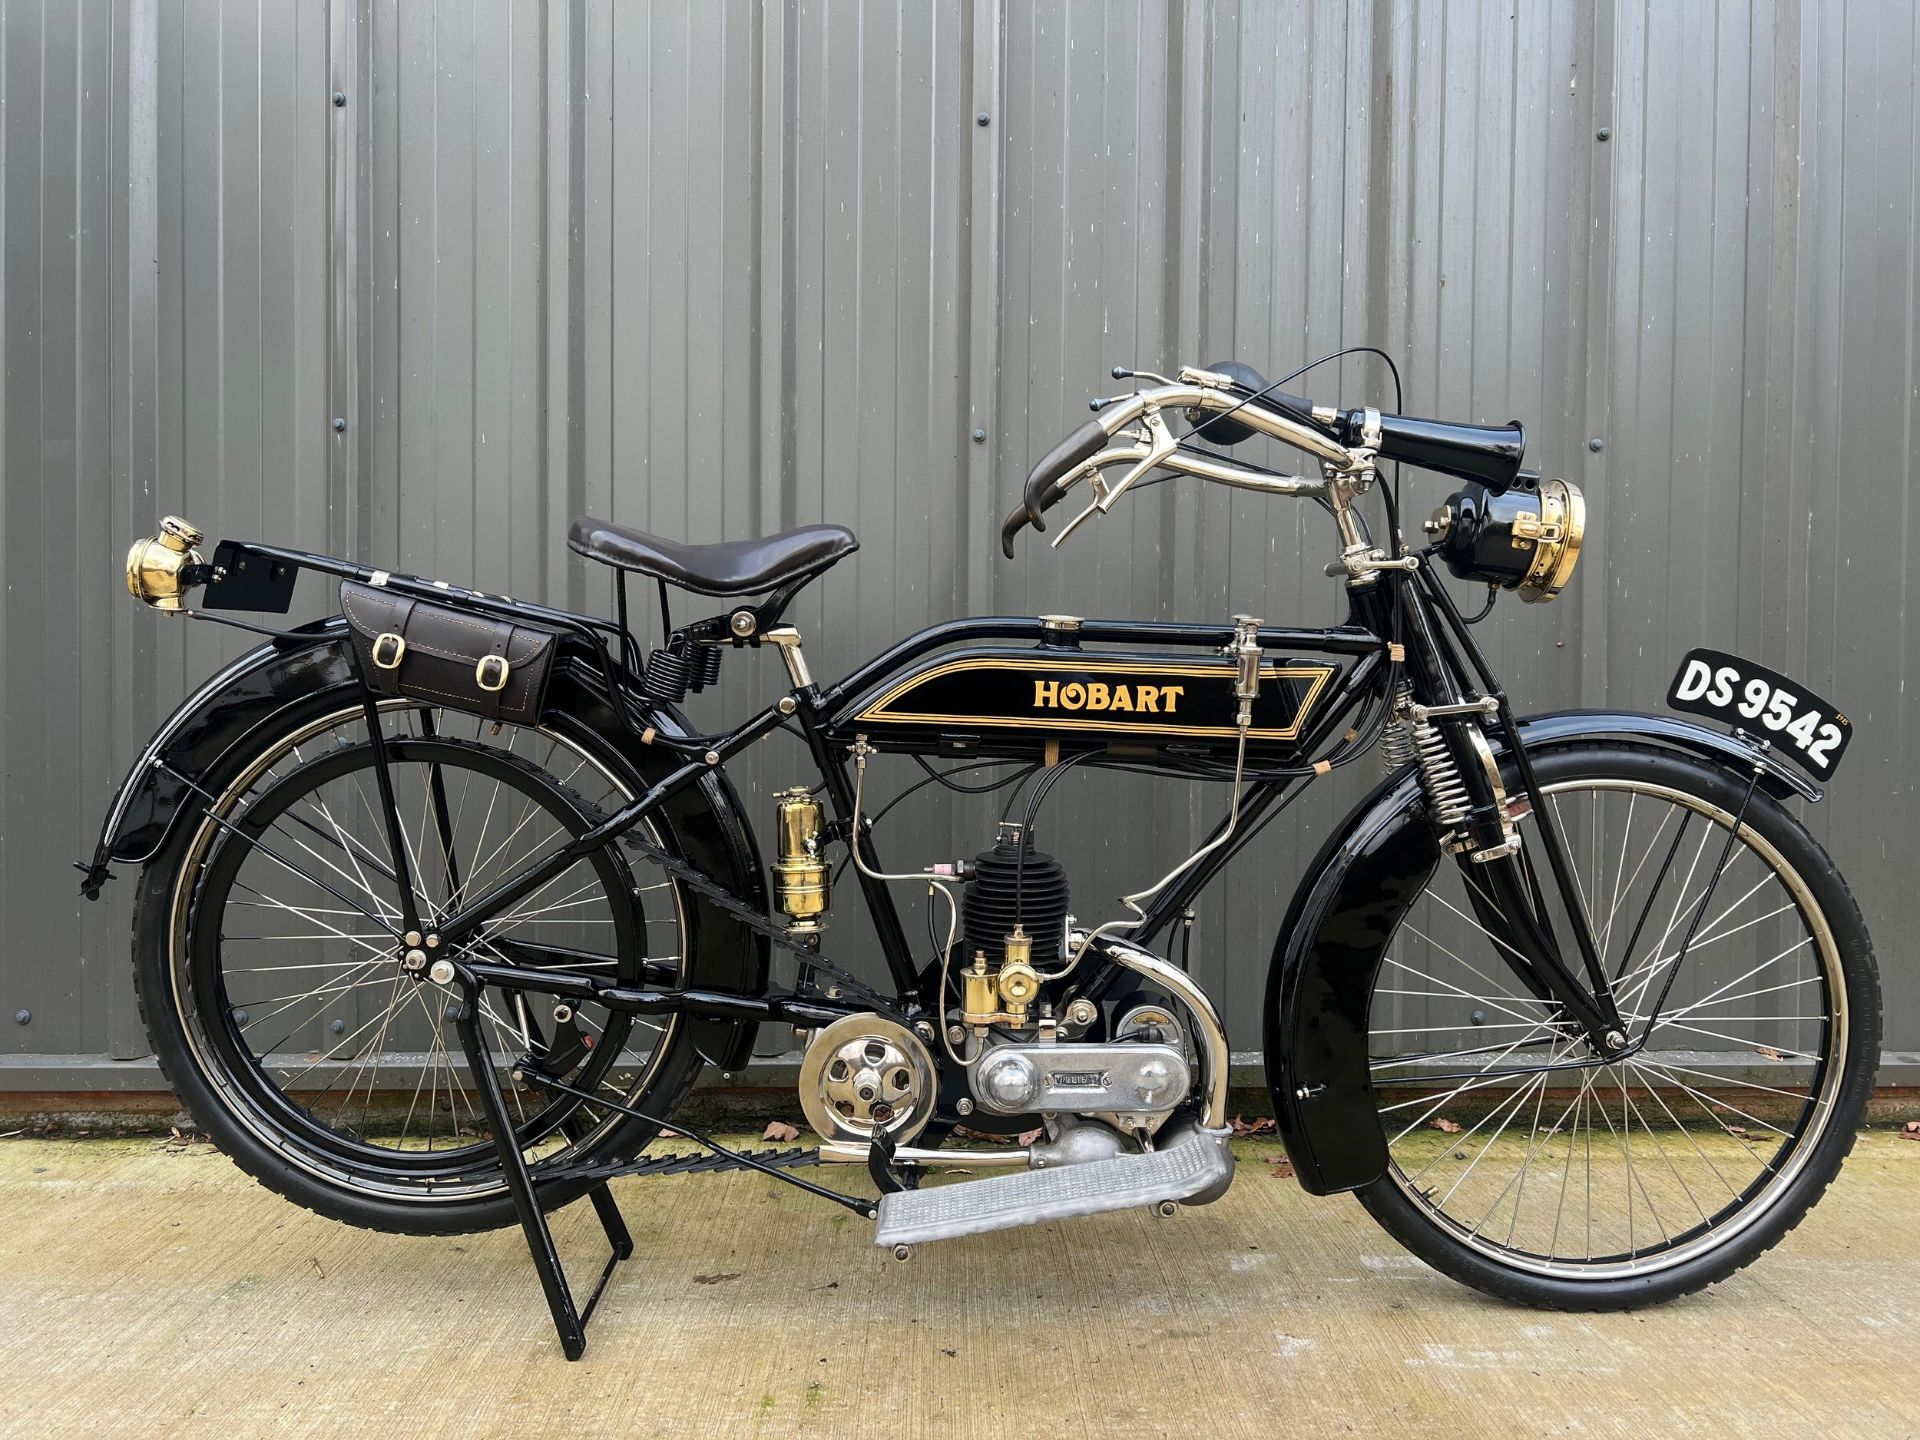 Hobart 2 Speed Flat Tank motorcycle. 1915. Frame No- 77466 Engine No- 06856 Believed to be the